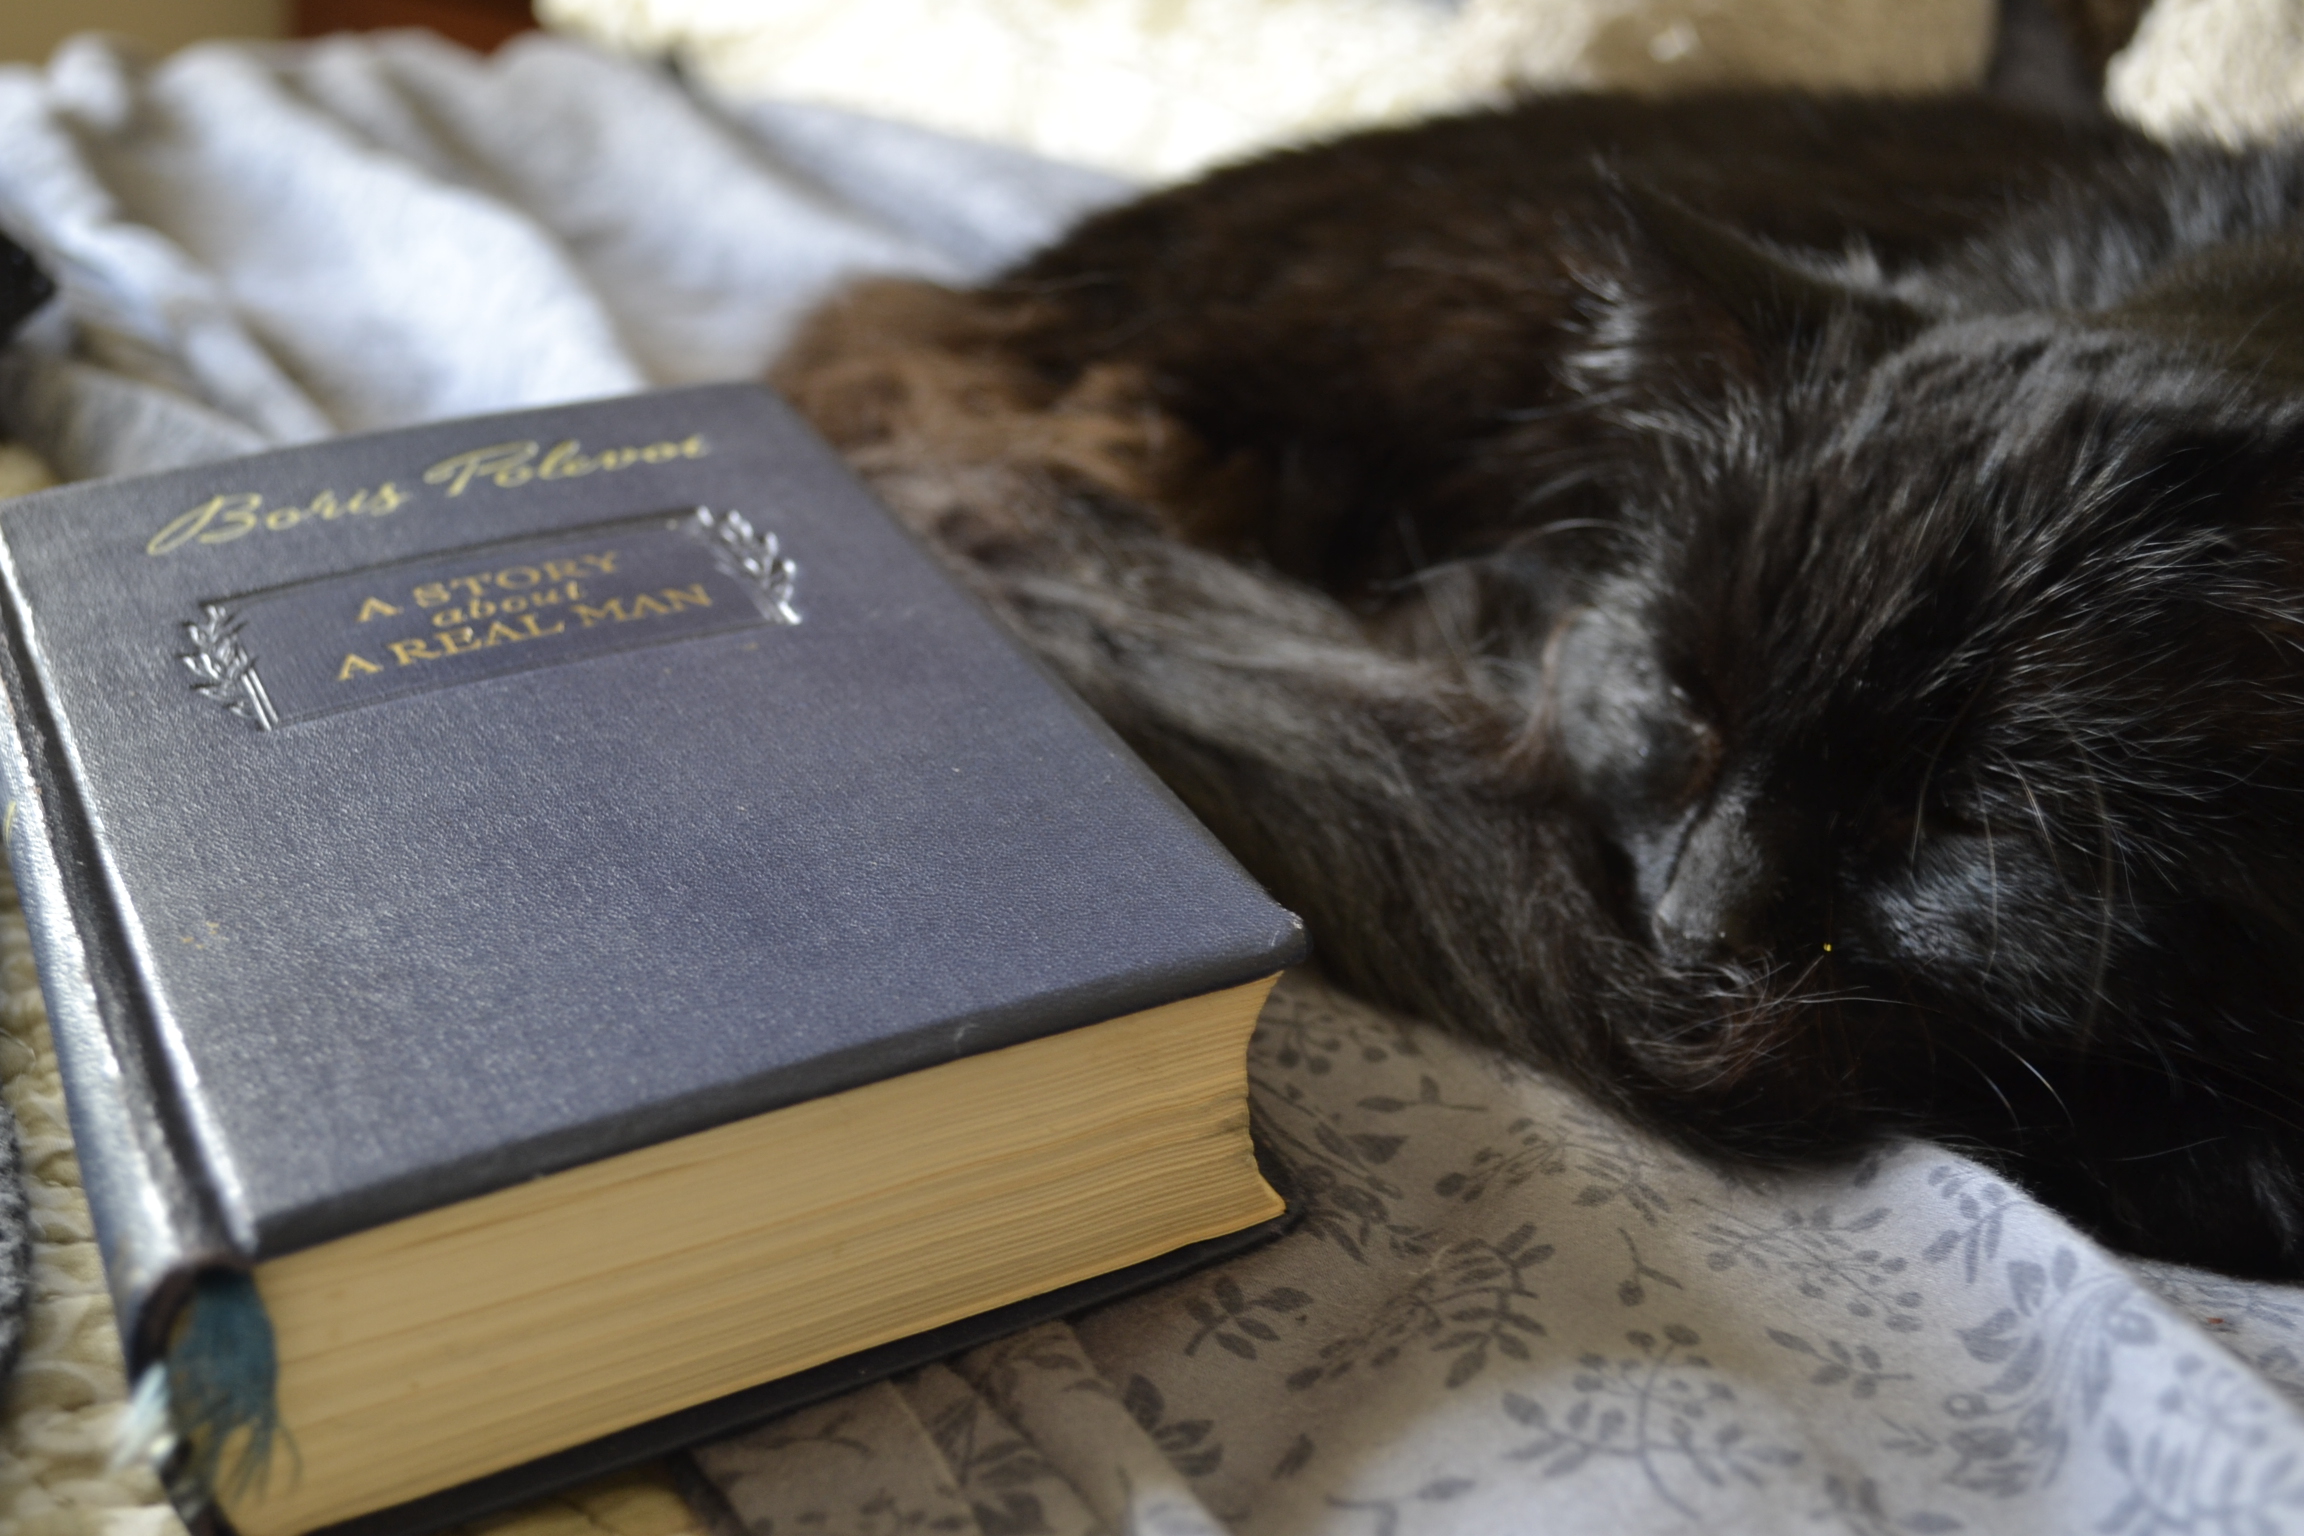 A long-haired black cat curled up beside a blue hardcover book: Polevoy's A Story of a Real Man.